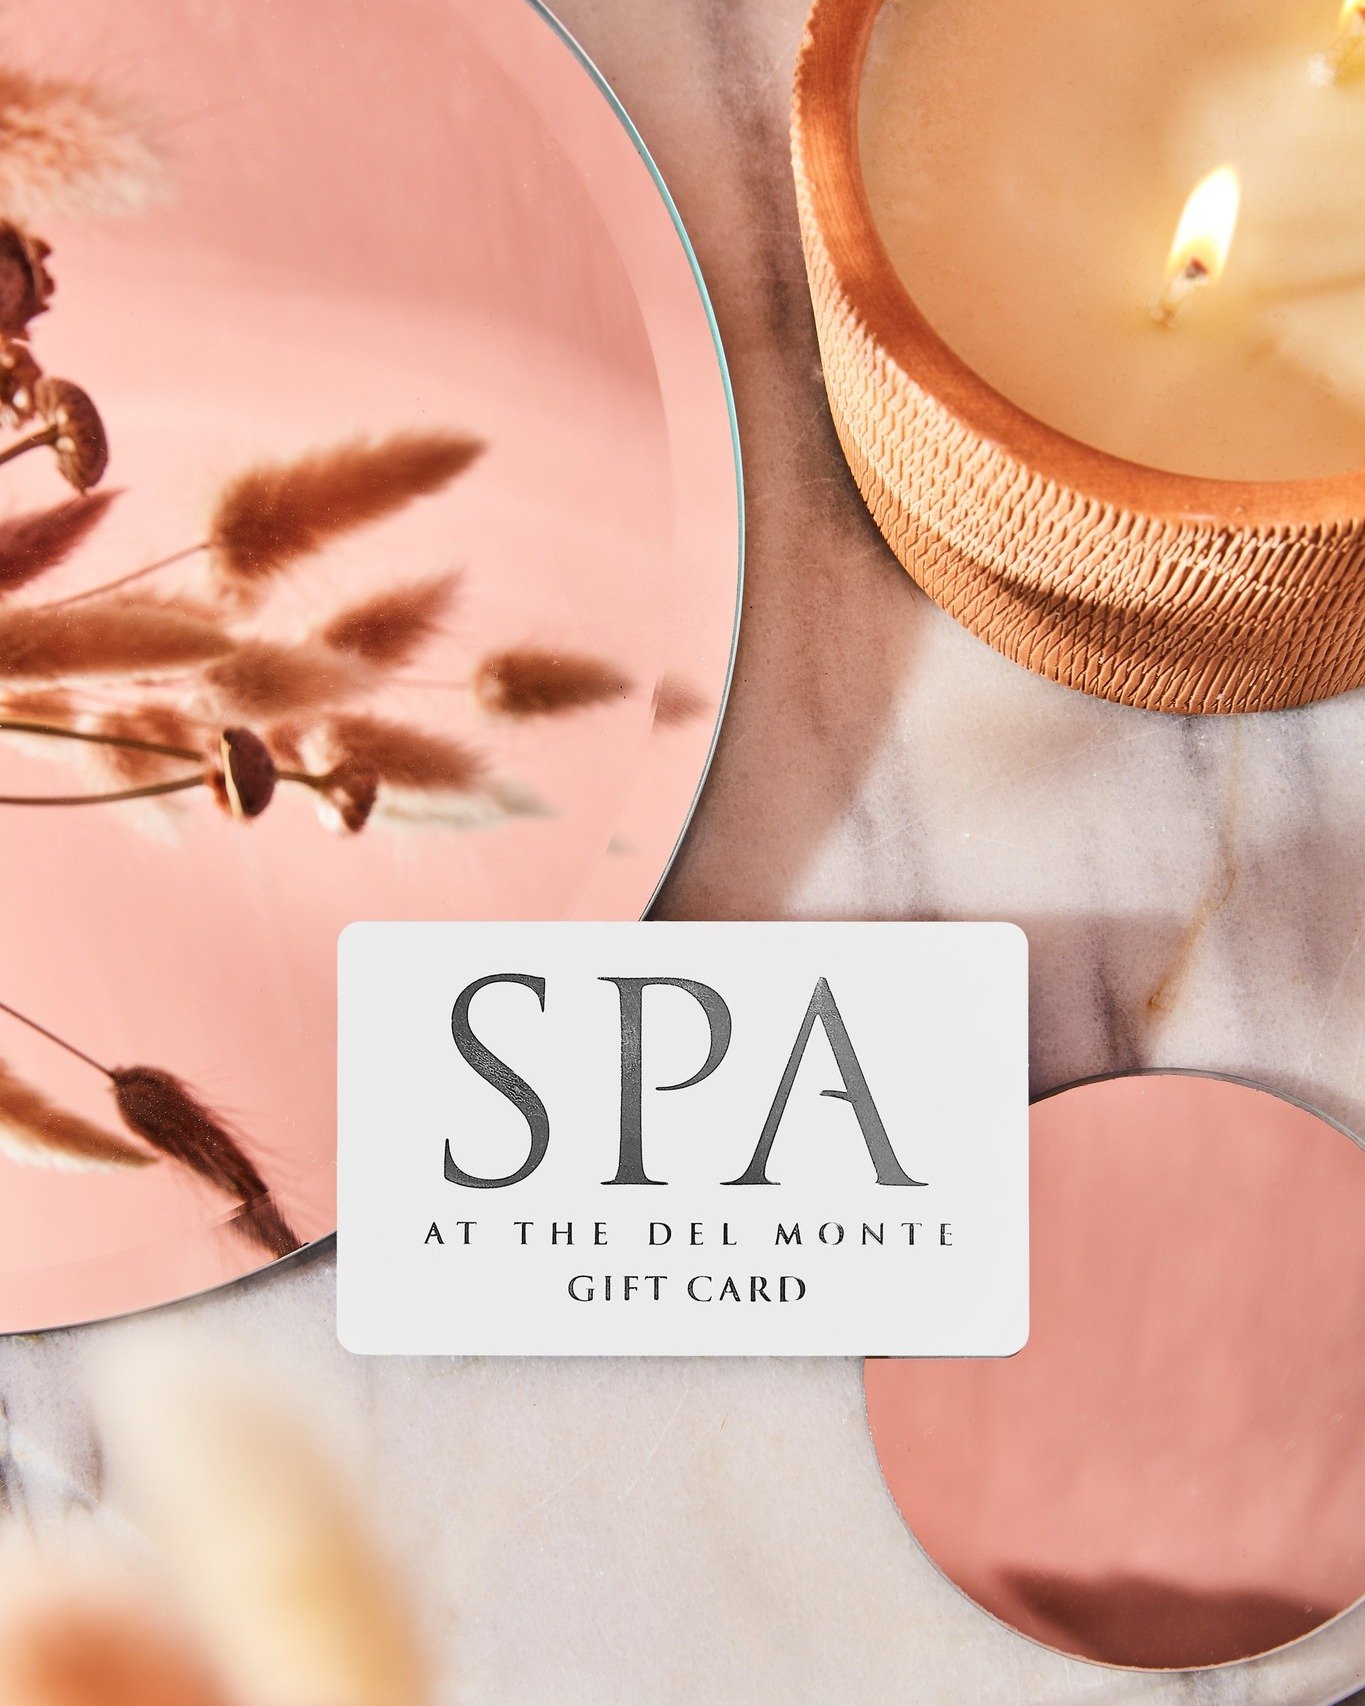 Moms make our world ✨brighter✨
.
.
.
Make her shine bright this Mother's Day with a gift card to her favorite place, the Spa at the Del Monte!
.
#delmontespa #skinhealth #spalife #spalife #spa #dayspa #pittsford #skincare #shoplocal #treatyourself #p